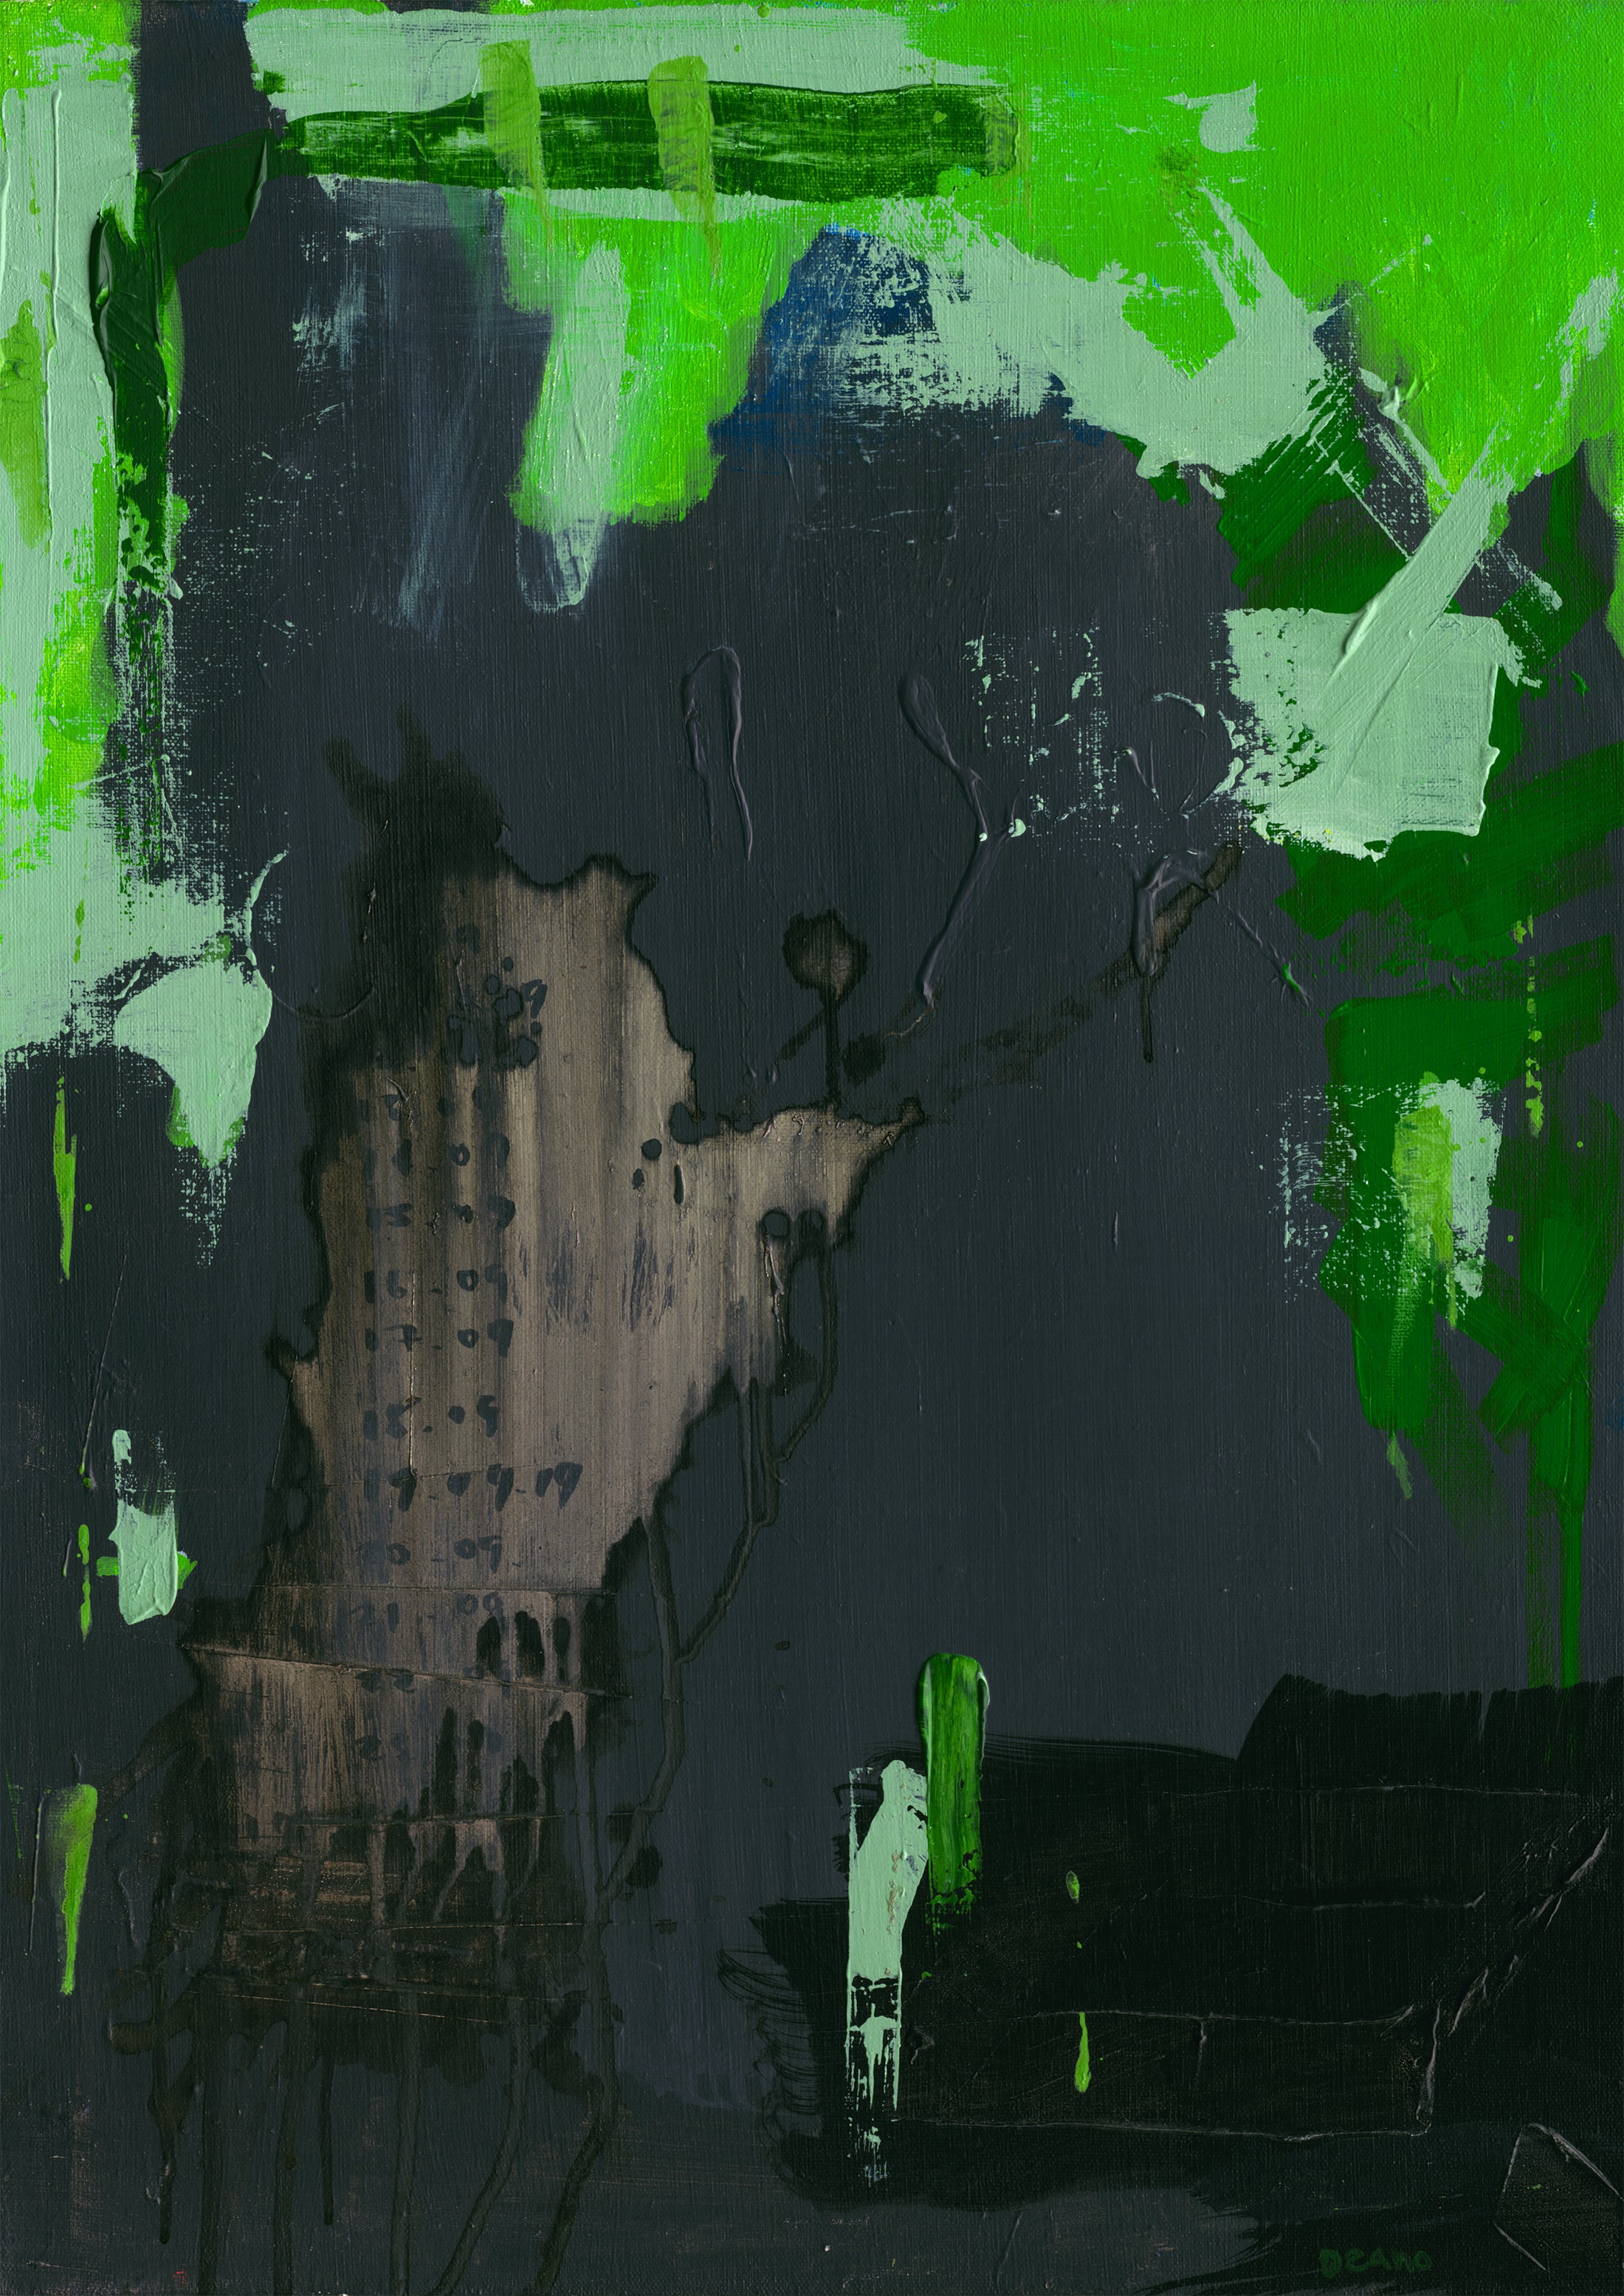 A close-up of an abstract limited edition print titled ‘Countdown’. The print features a fusion of greens and blacks, enriched by a subtle backdrop of mysterious date sequences. 